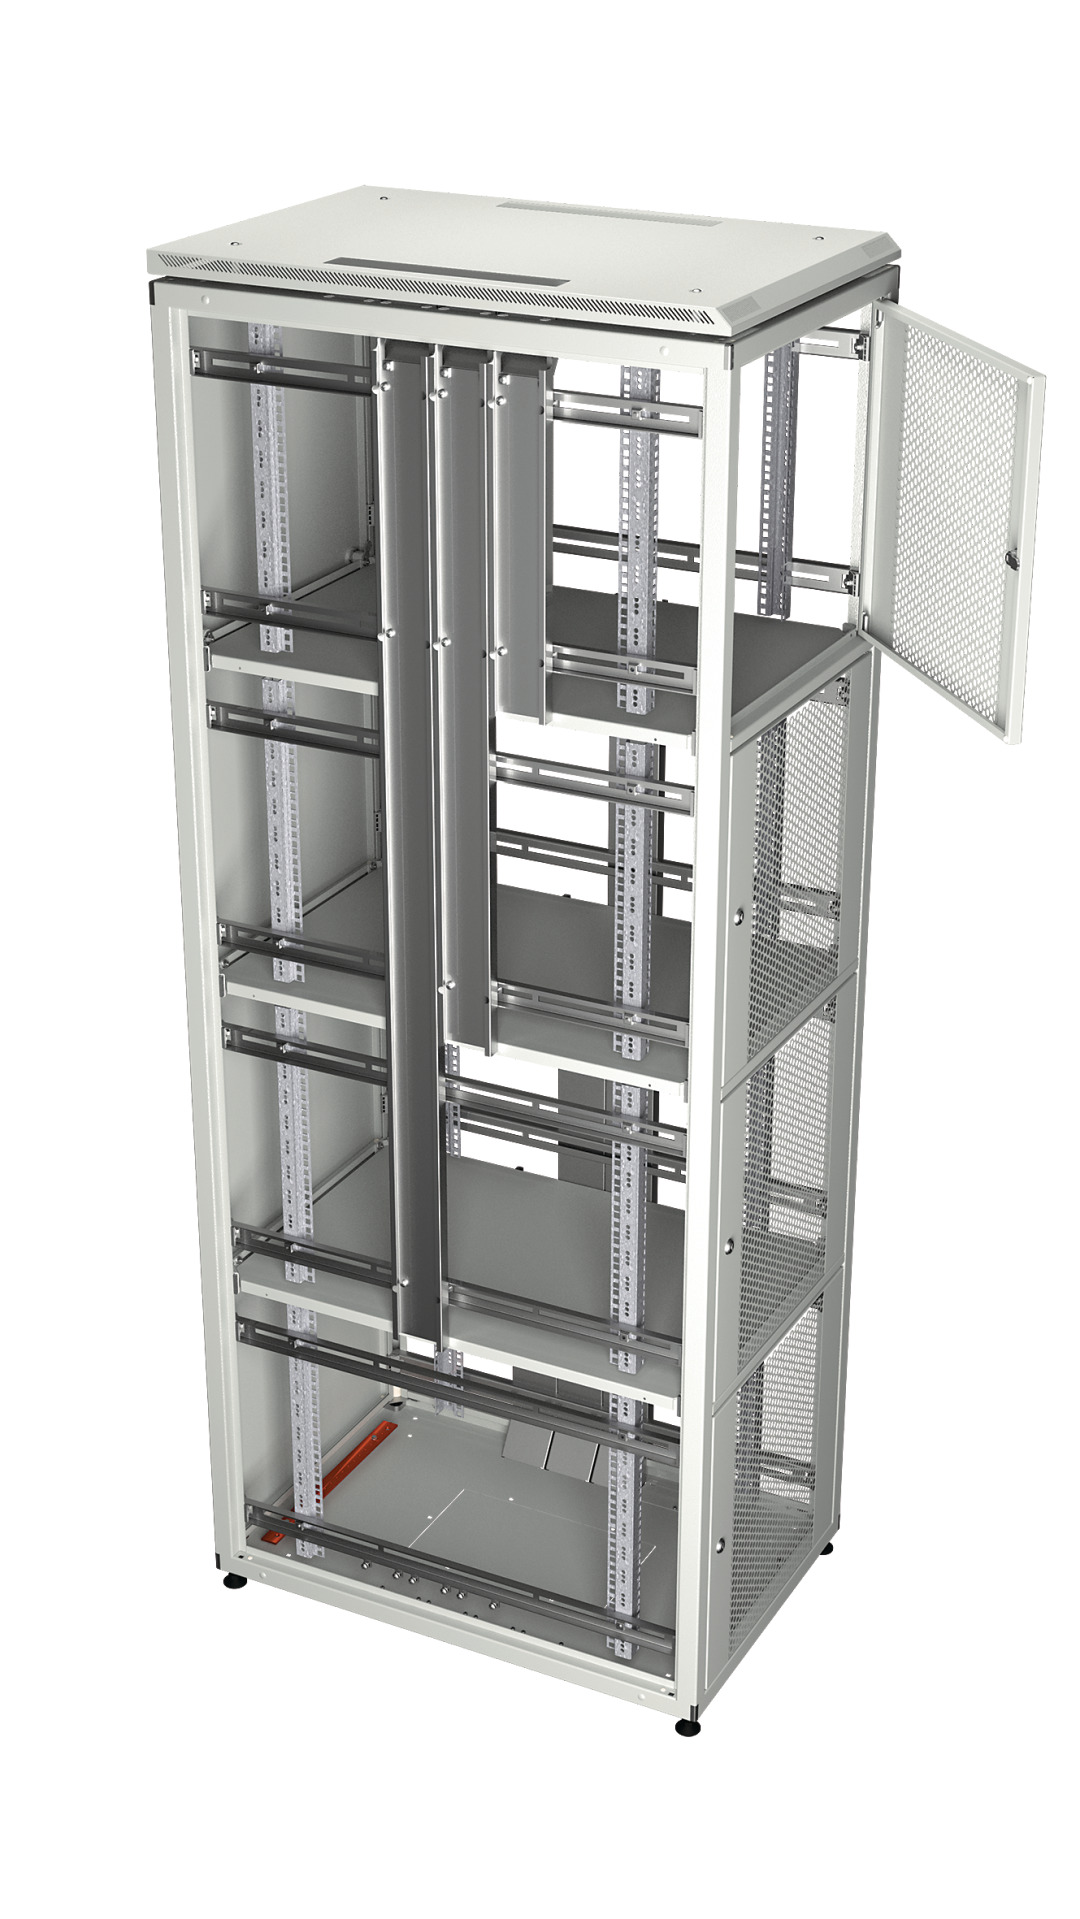 Co-Location Rack PRO, 2 x 20U, 600x1200 mm, F+R 1-Part Perforated, RAL9005